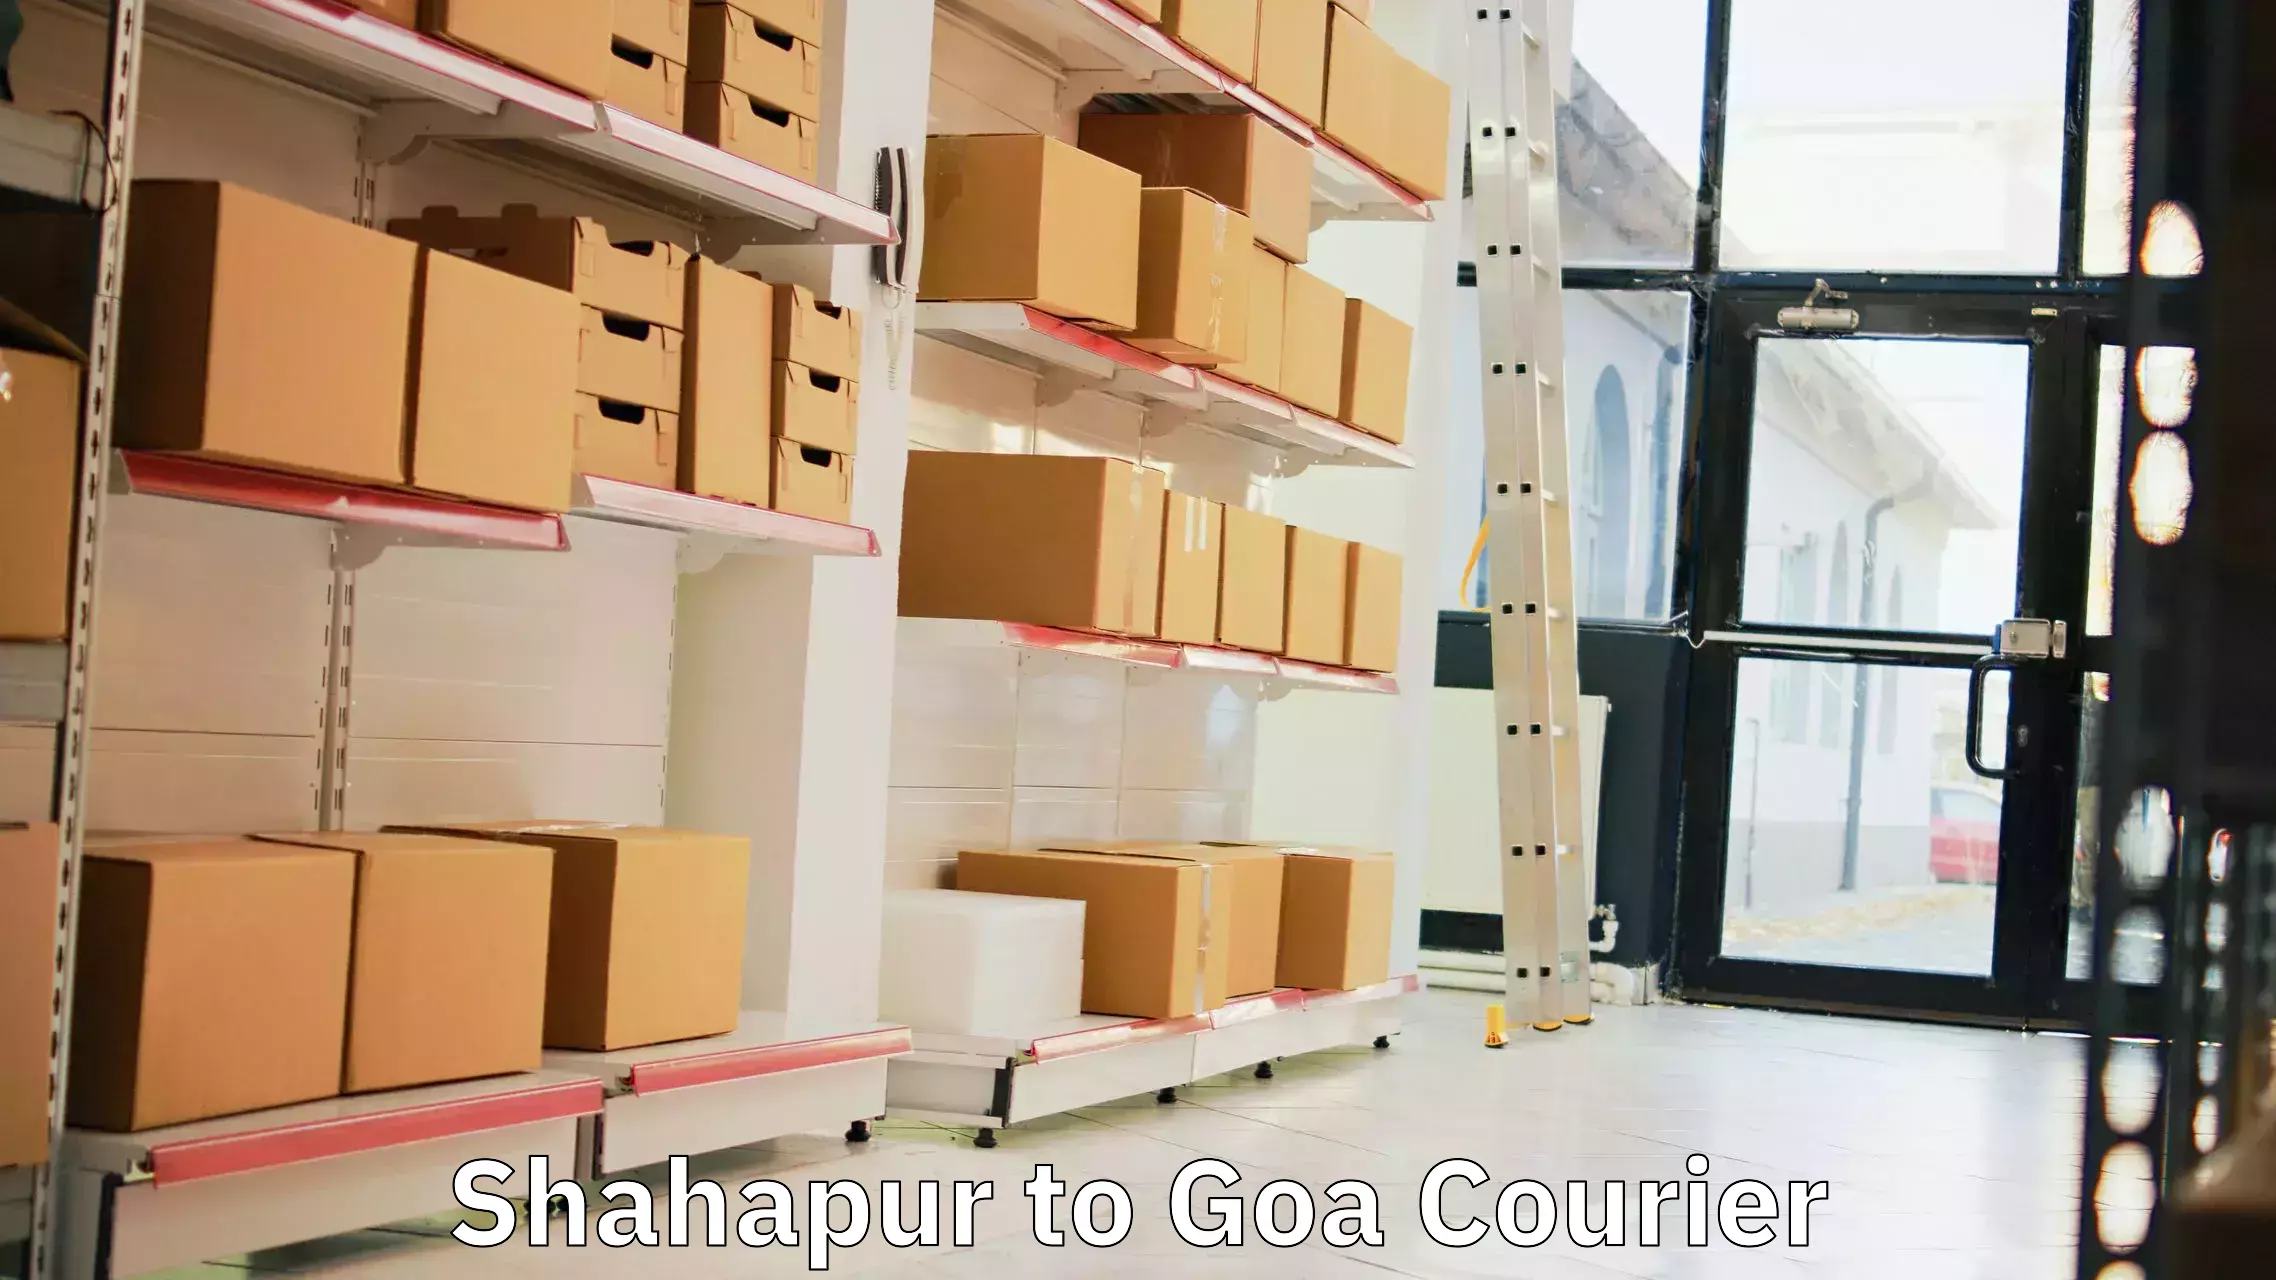 Courier services in Shahapur to Bardez